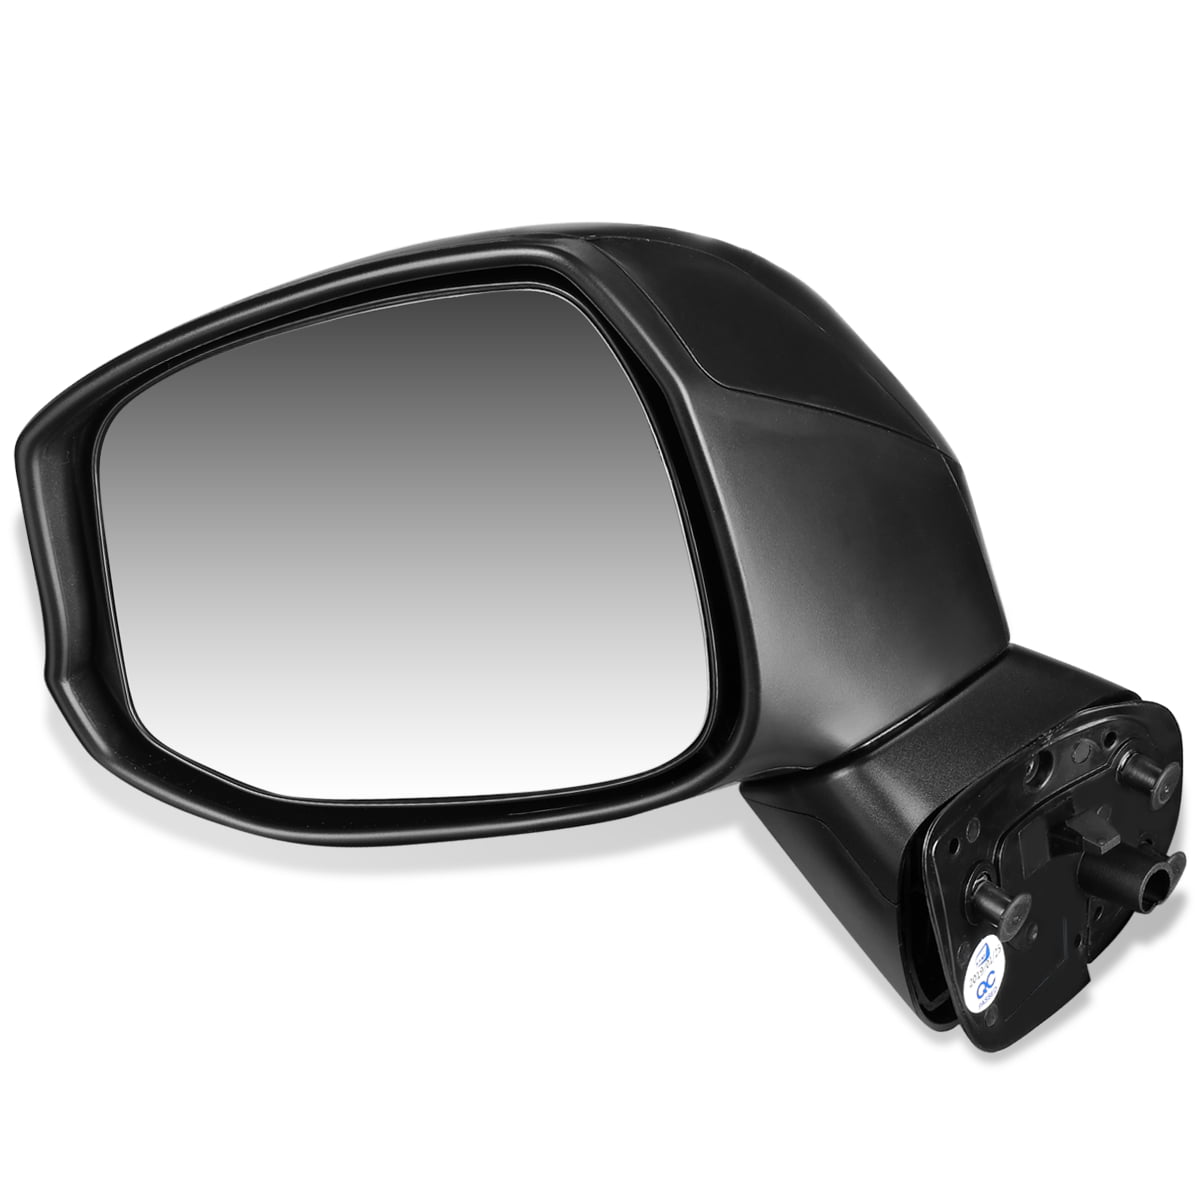 2015 Honda Civic Driver Side Mirror Replacement